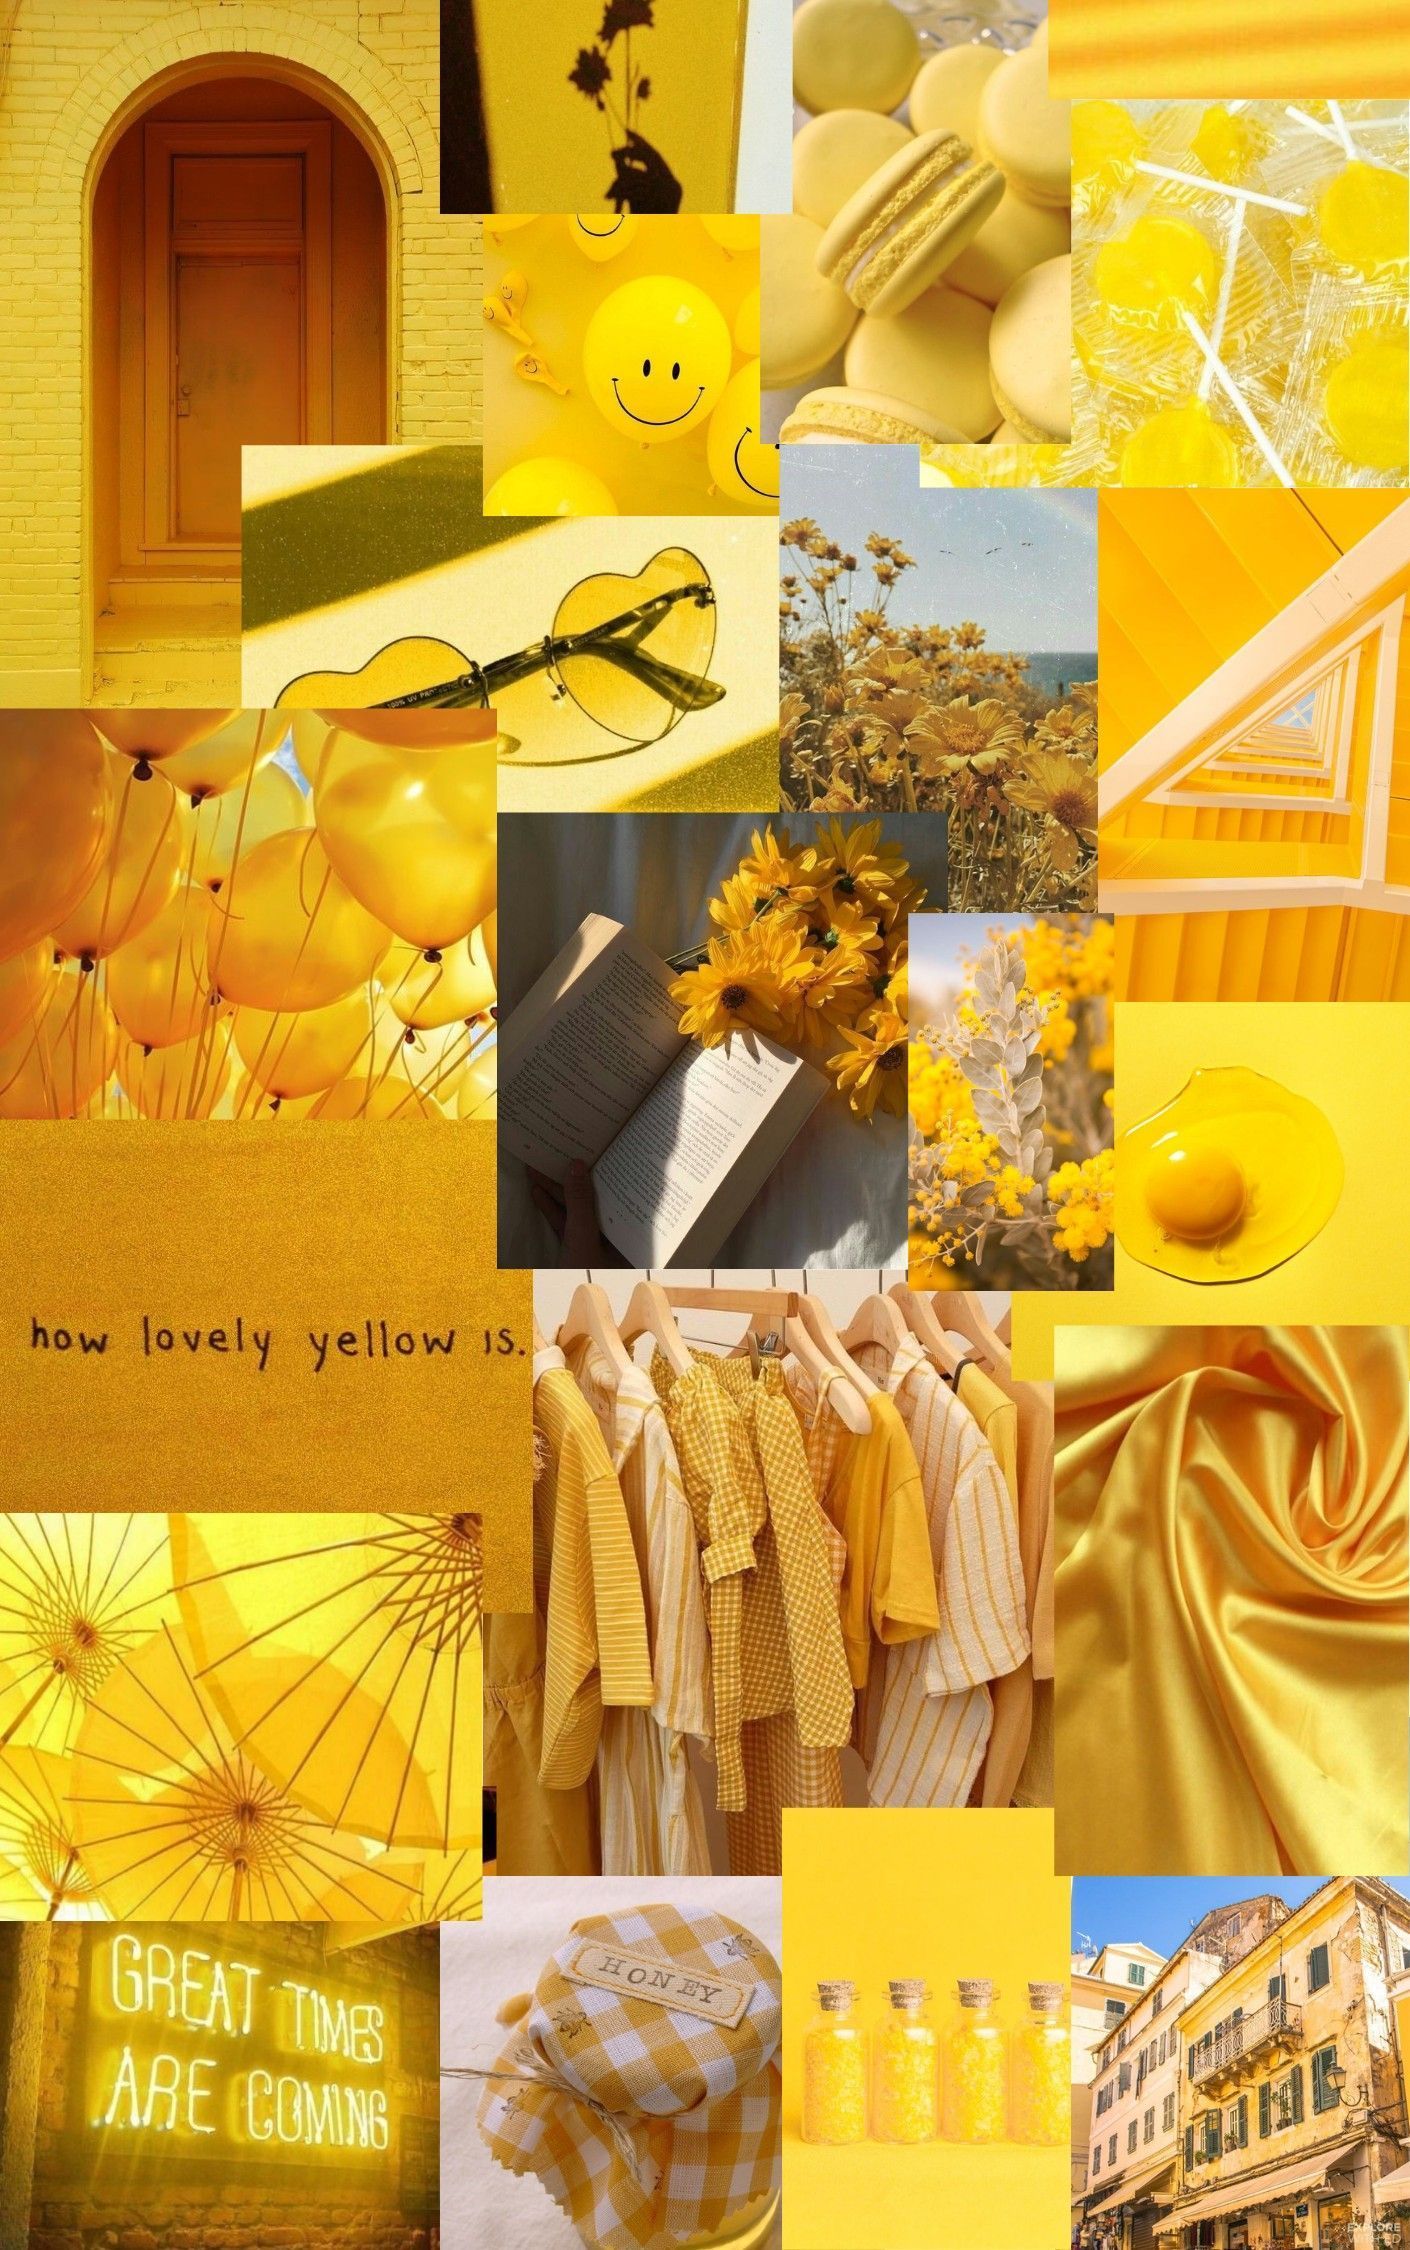 A collage of yellow and white images - Sunshine